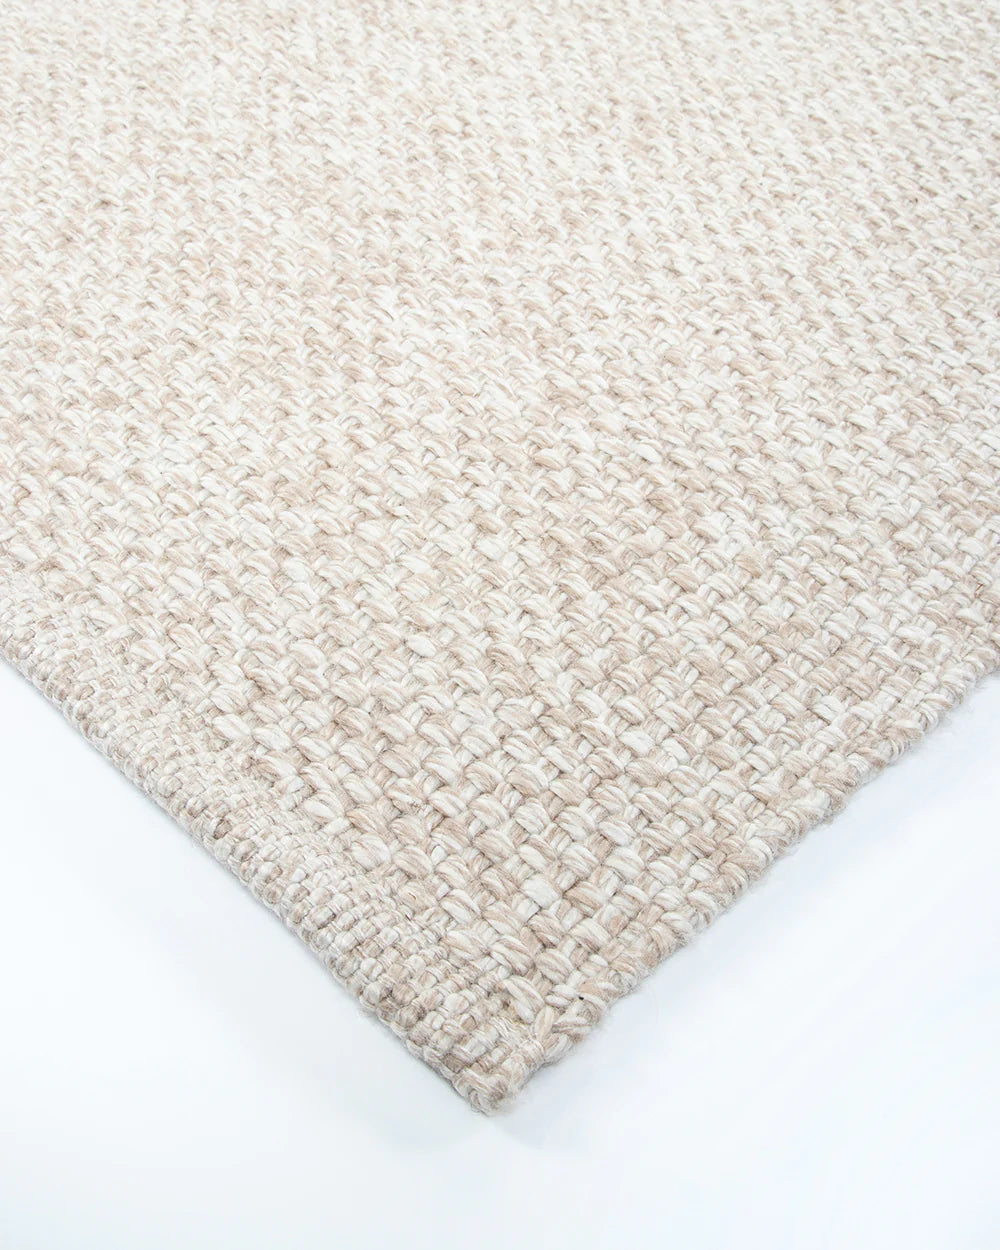 Burleigh Outdoor PET Rug from Baya Furtex Stockist Make Your House A Home, Furniture Store Bendigo. Free Australia Wide Delivery.